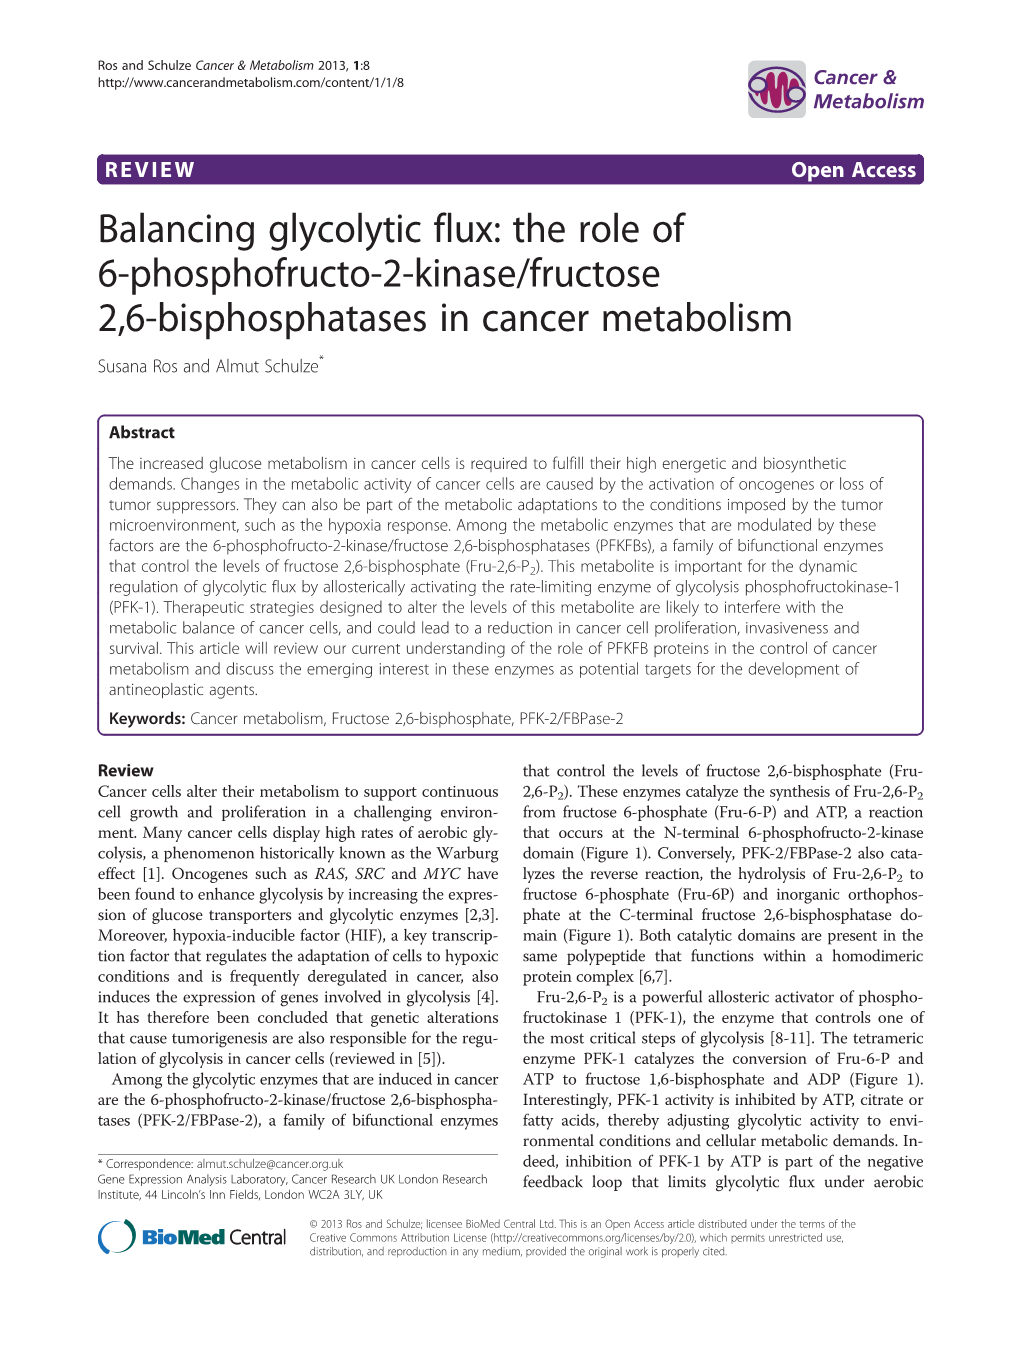 Balancing Glycolytic Flux: the Role of 6-Phosphofructo-2-Kinase/Fructose 2,6-Bisphosphatases in Cancer Metabolism Susana Ros and Almut Schulze*